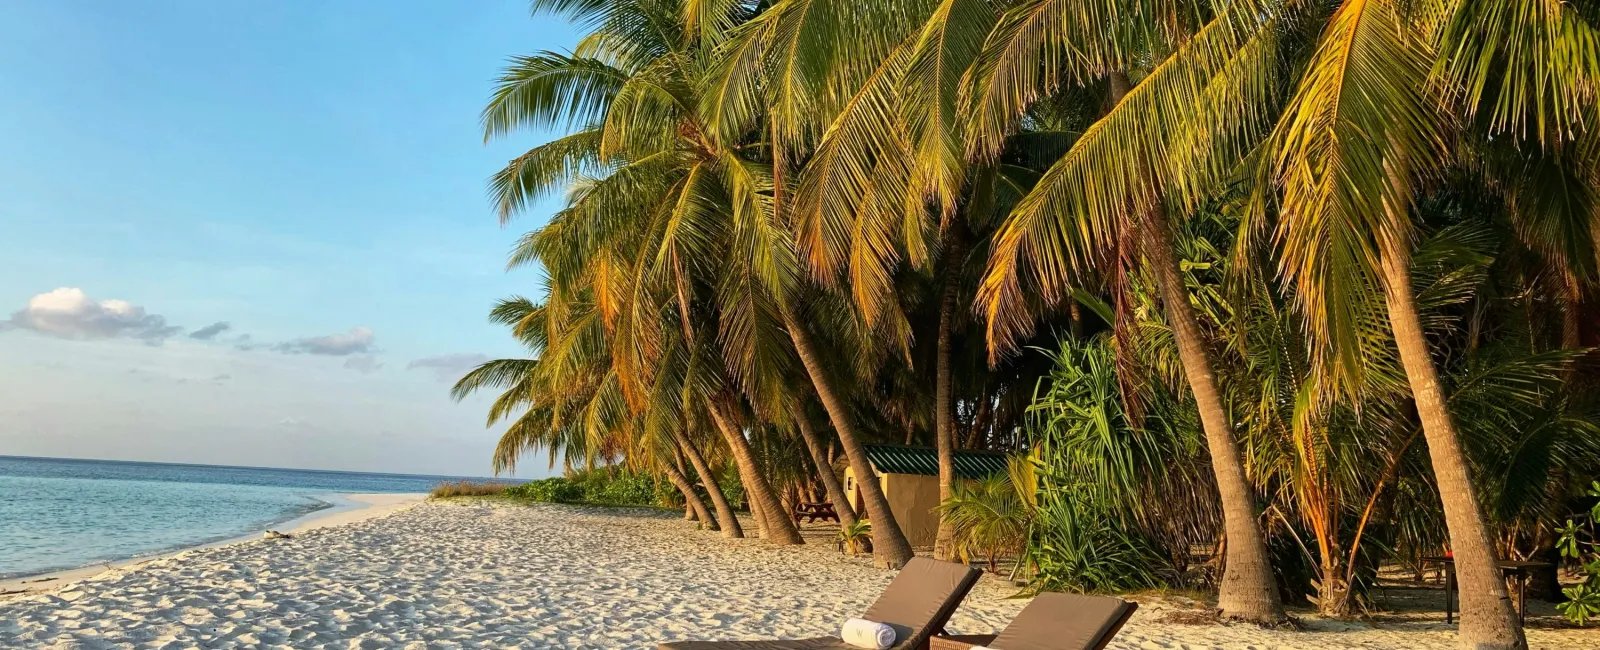 a lounge chair and palm trees on a beach